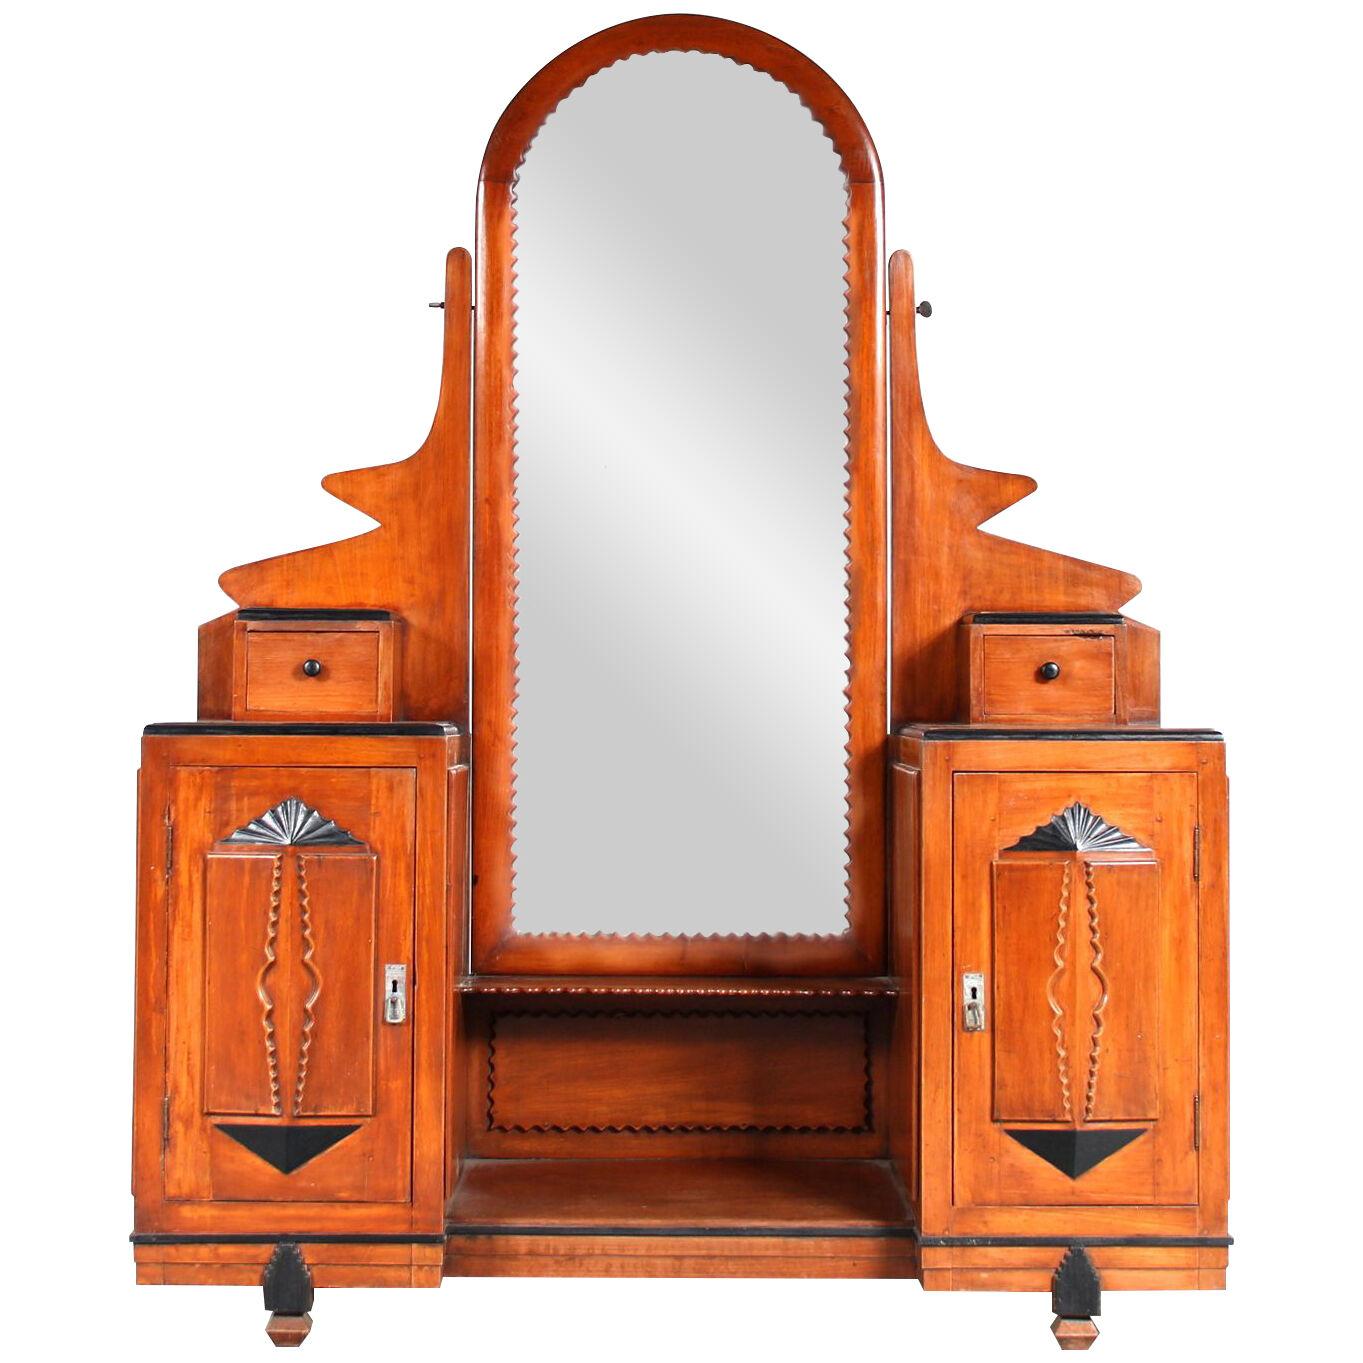 Colonial Dressing Table in Amsterdam School Style, Indonesia 1920